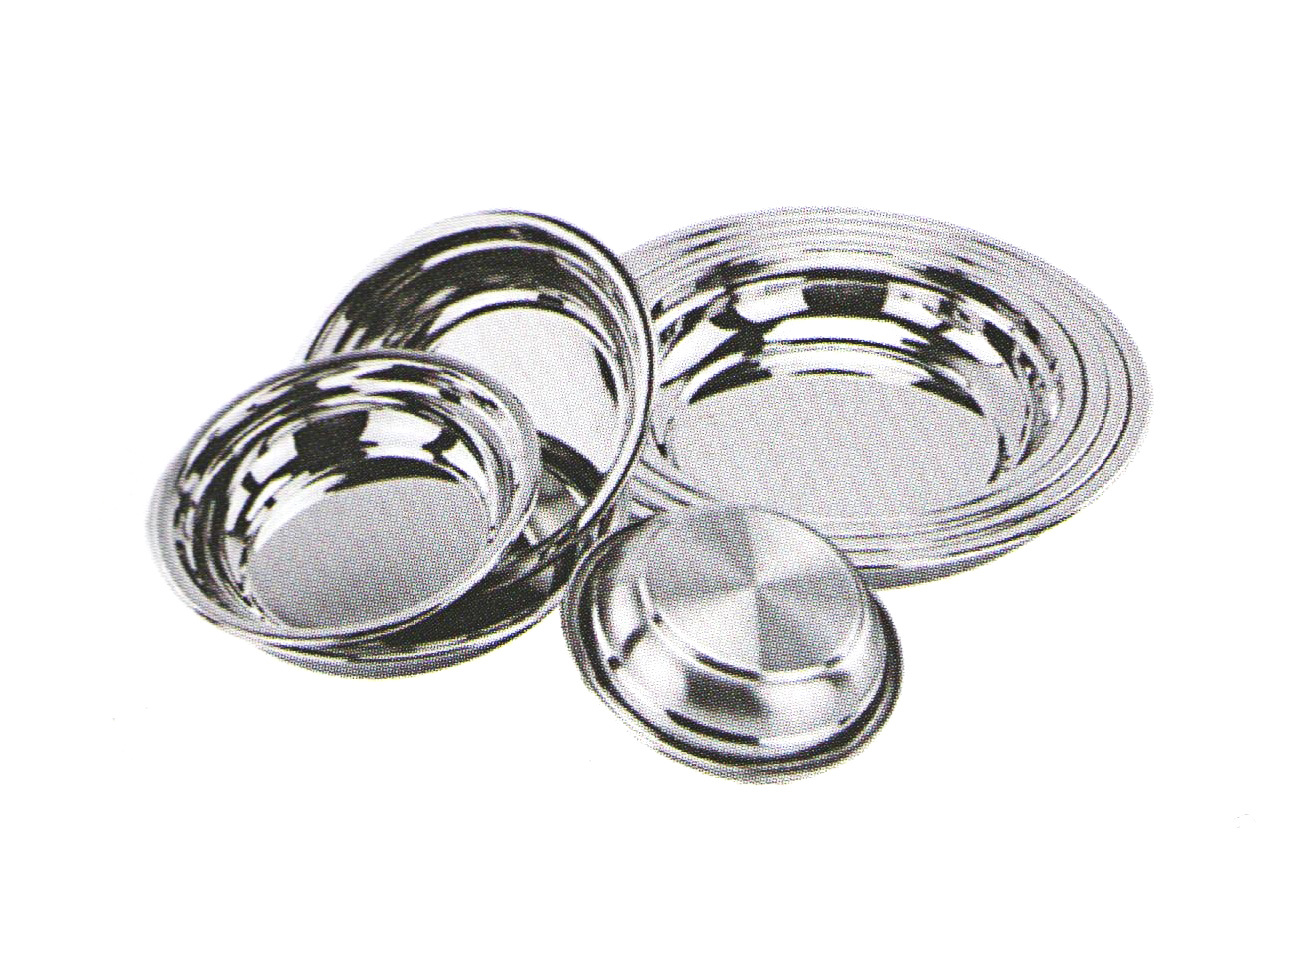 factory low price 24pcs Stainless Steel Cutlery Set -
 Stainless Steel Kitchenware Oval Tray in Round Design Sp006 – Long Prosper